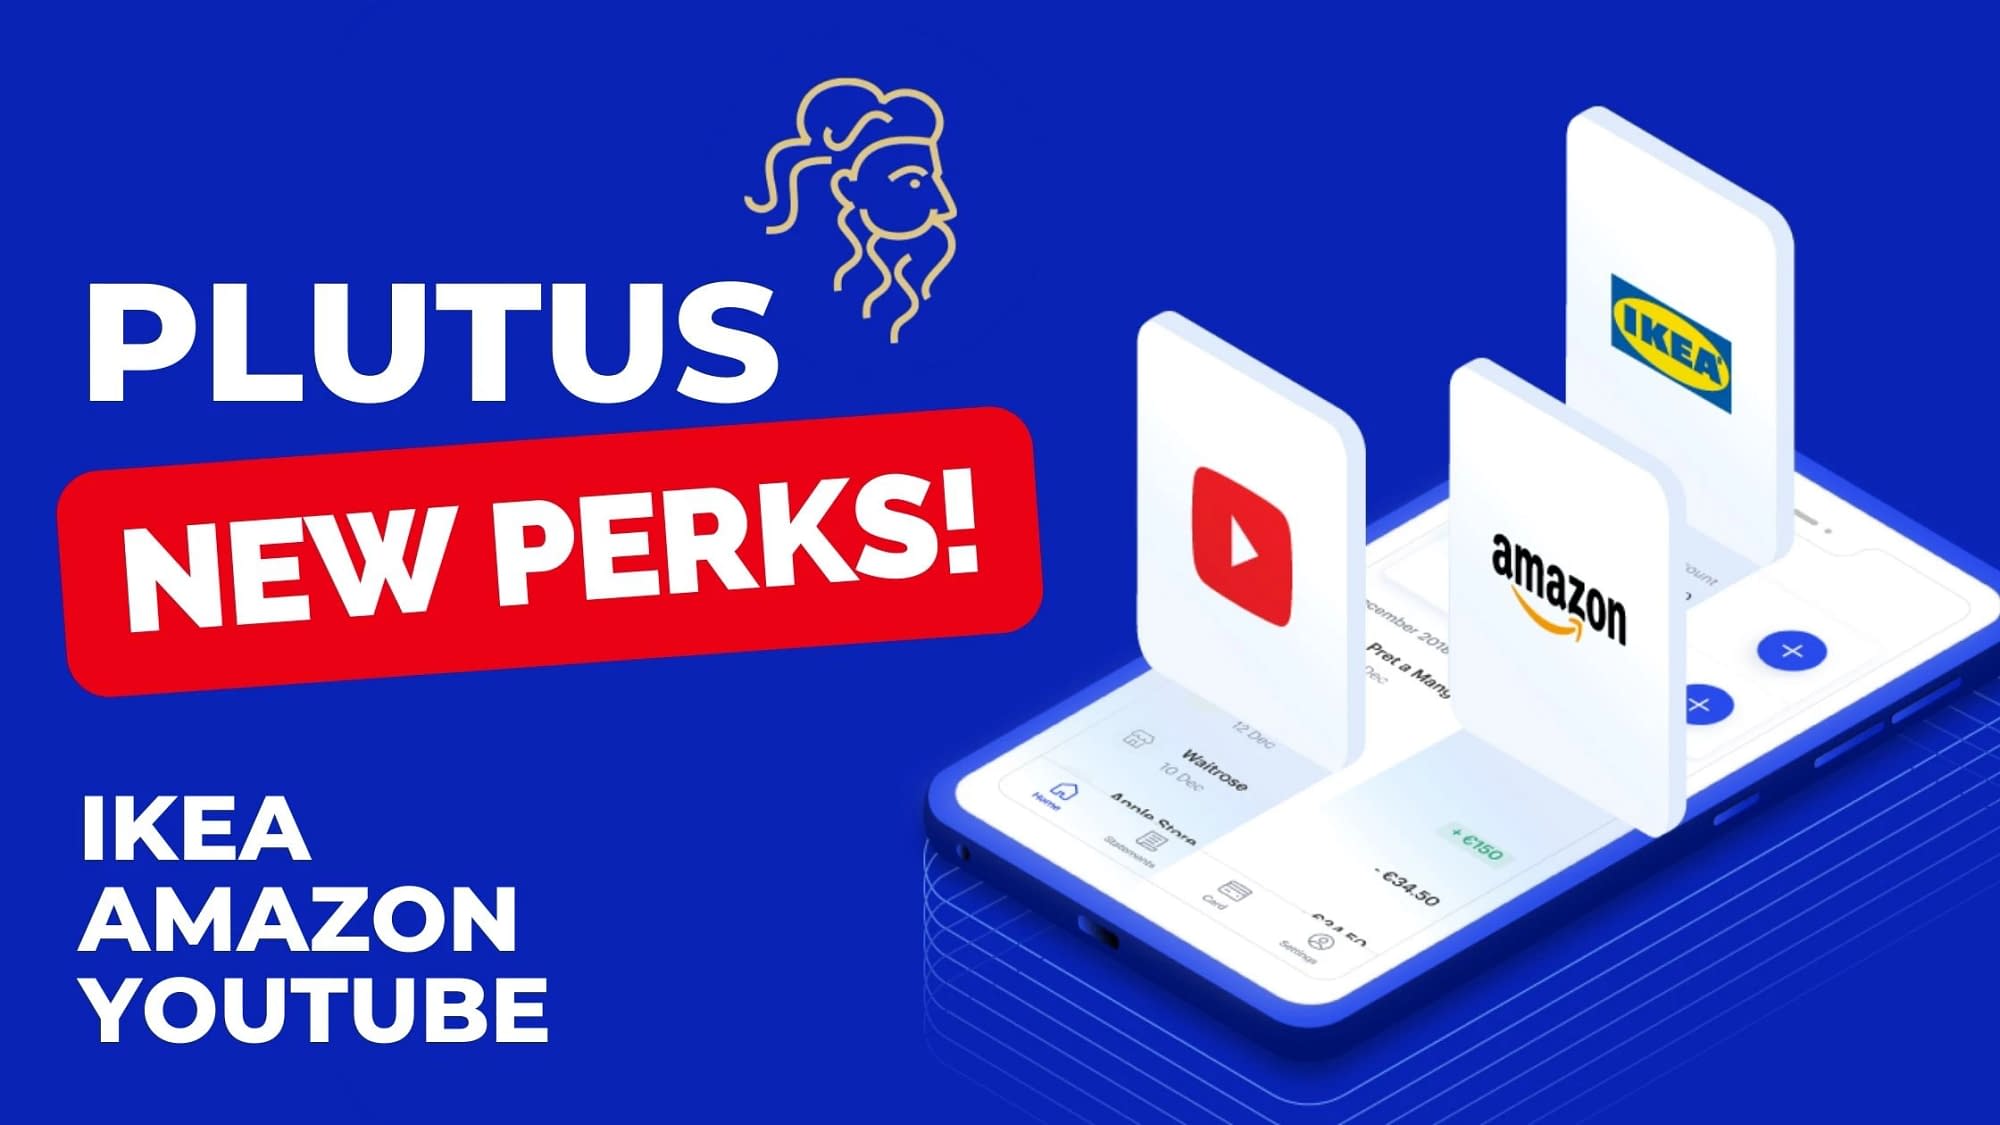 Plutus New Perks Announced Including Ikea, YouTube and Amazon!